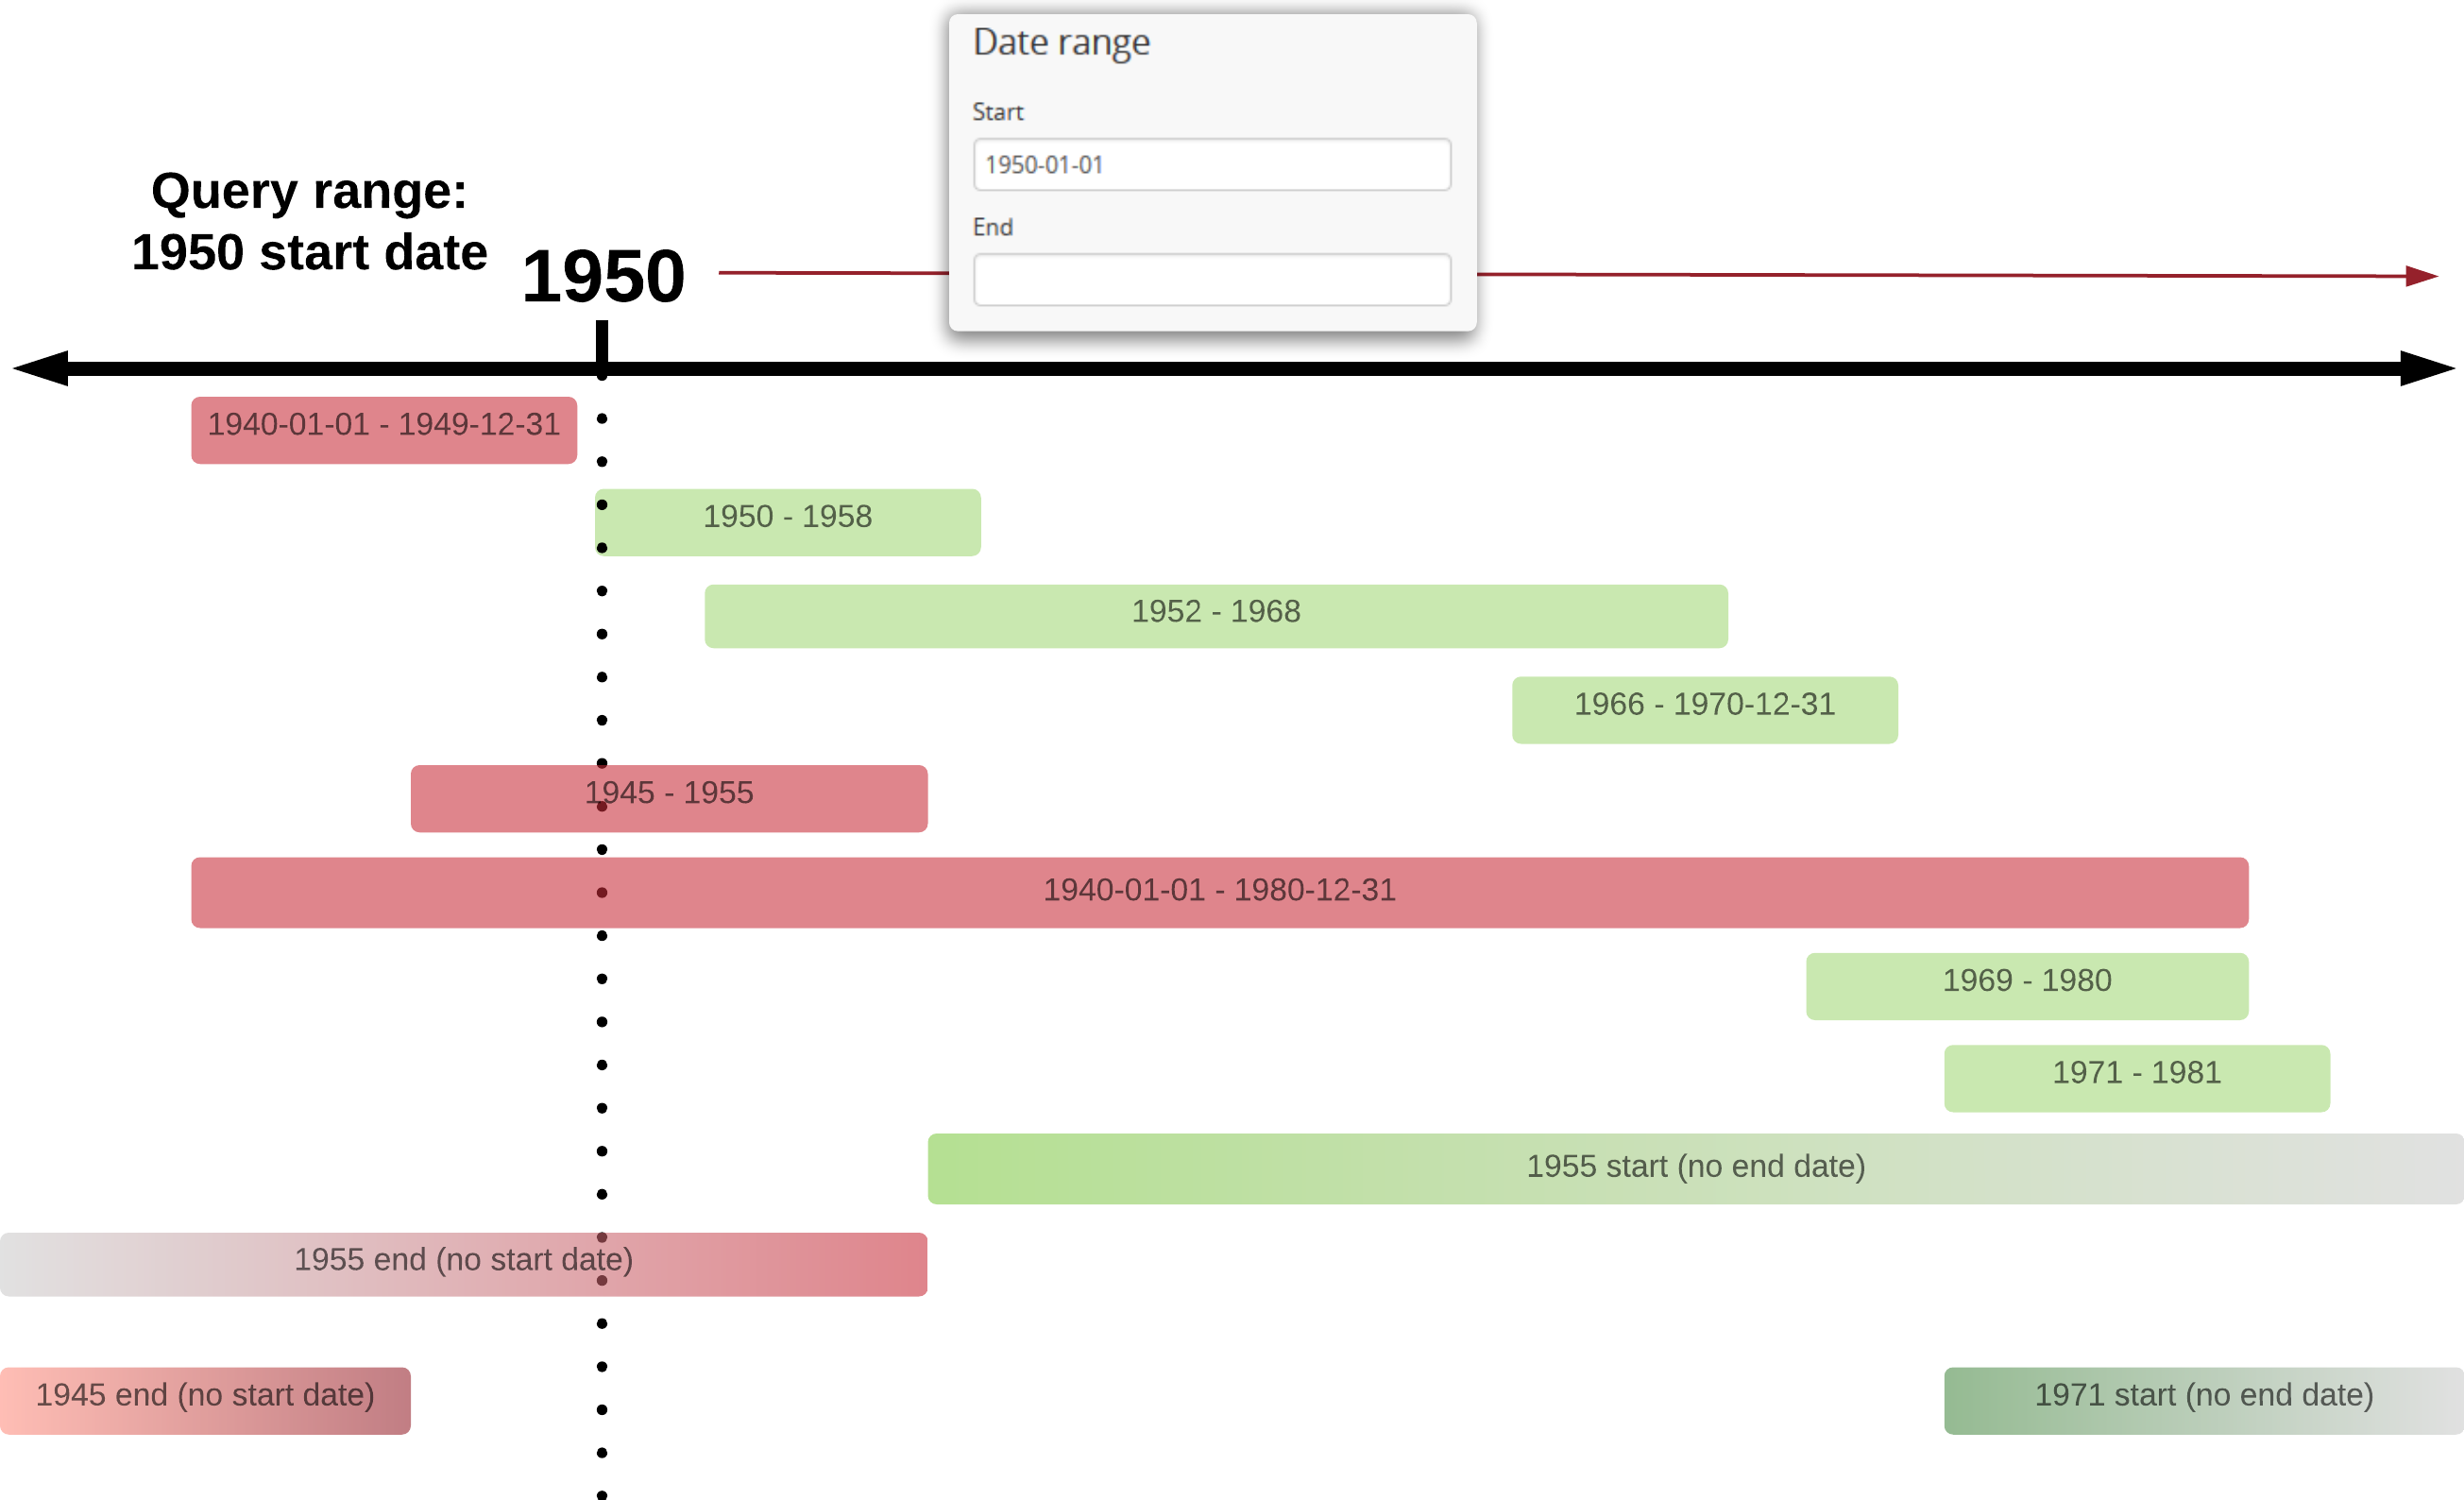 An example of results returned for a 1950 start date query using the Exact option